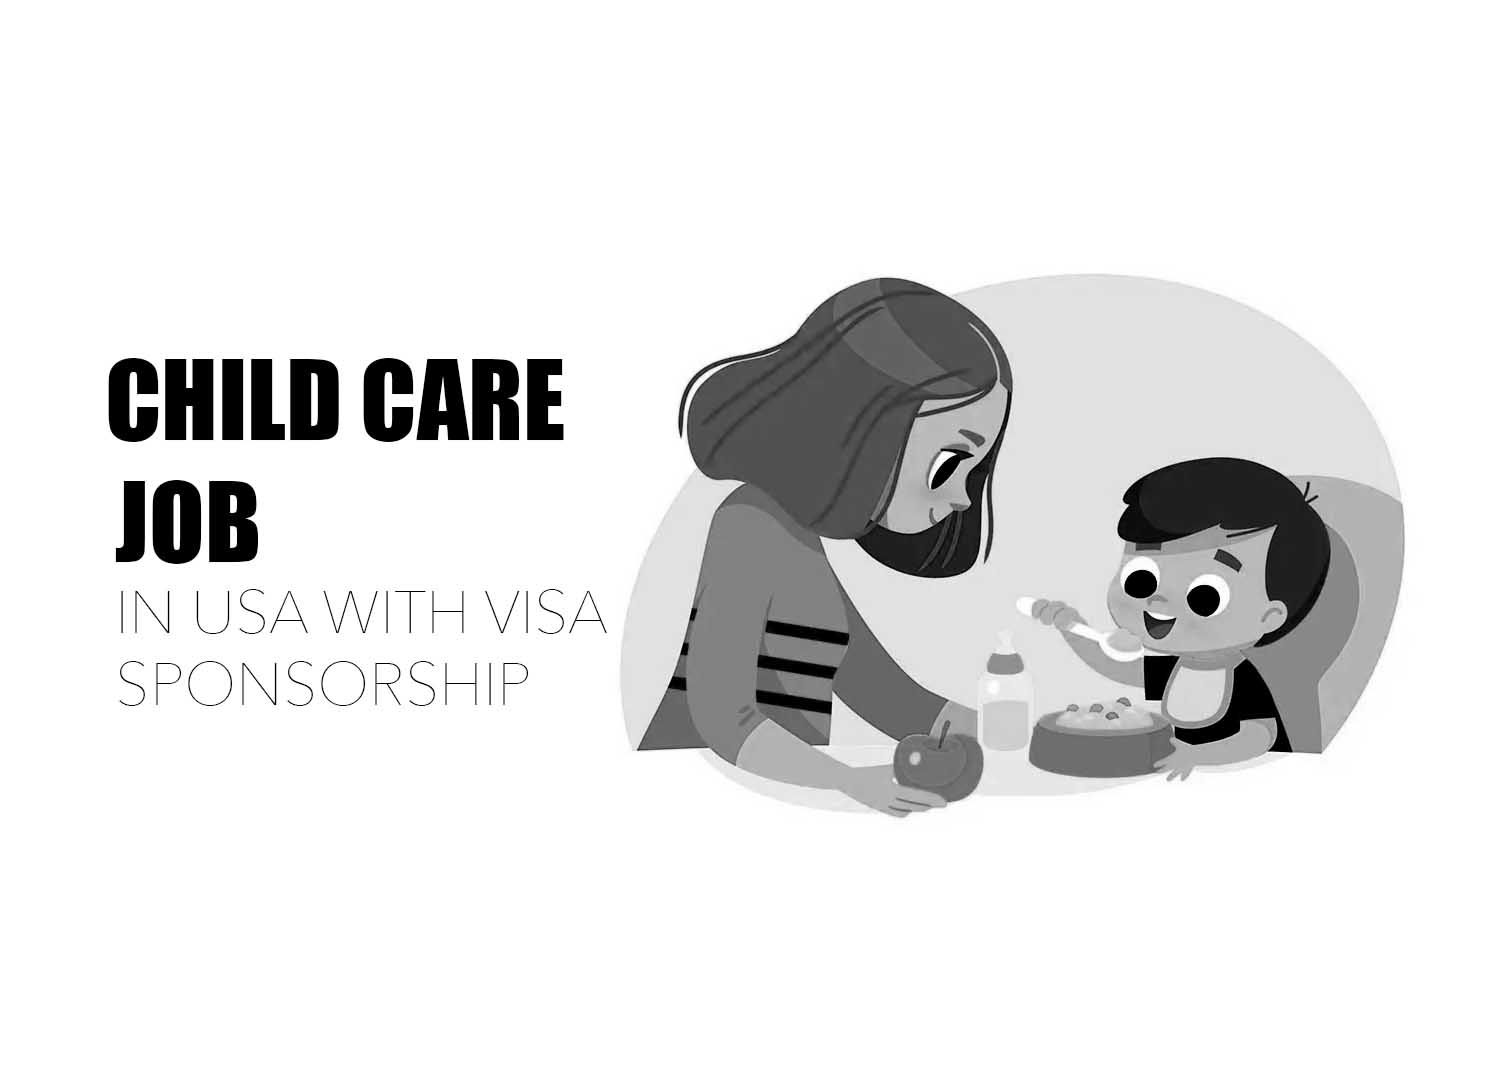 Child Care Jobs in USA with Visa Sponsorship - Apply Now!